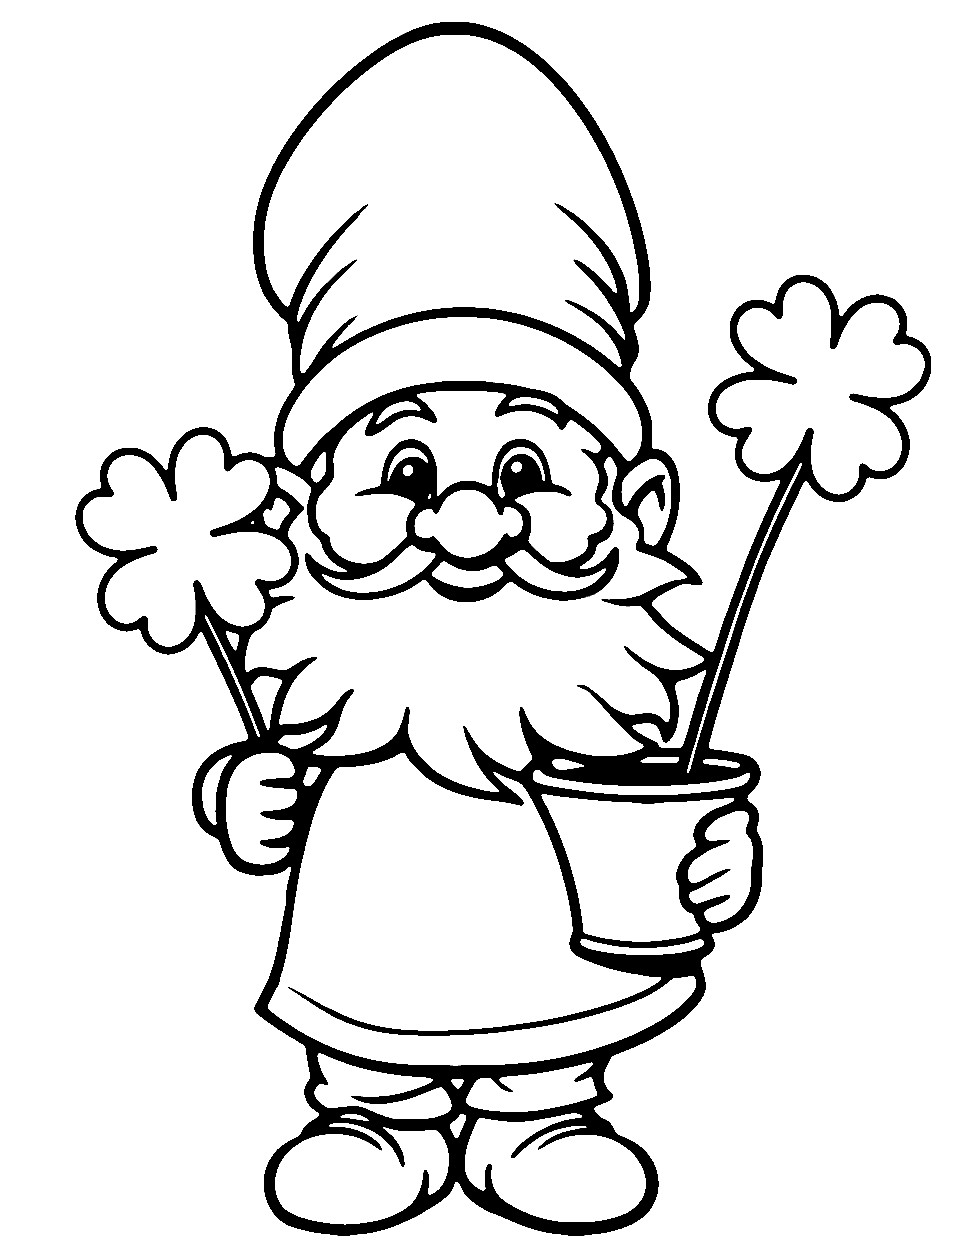 Gnome Holding a Clover Coloring Page - A cheerful gnome clutching a shamrocks in his hands.